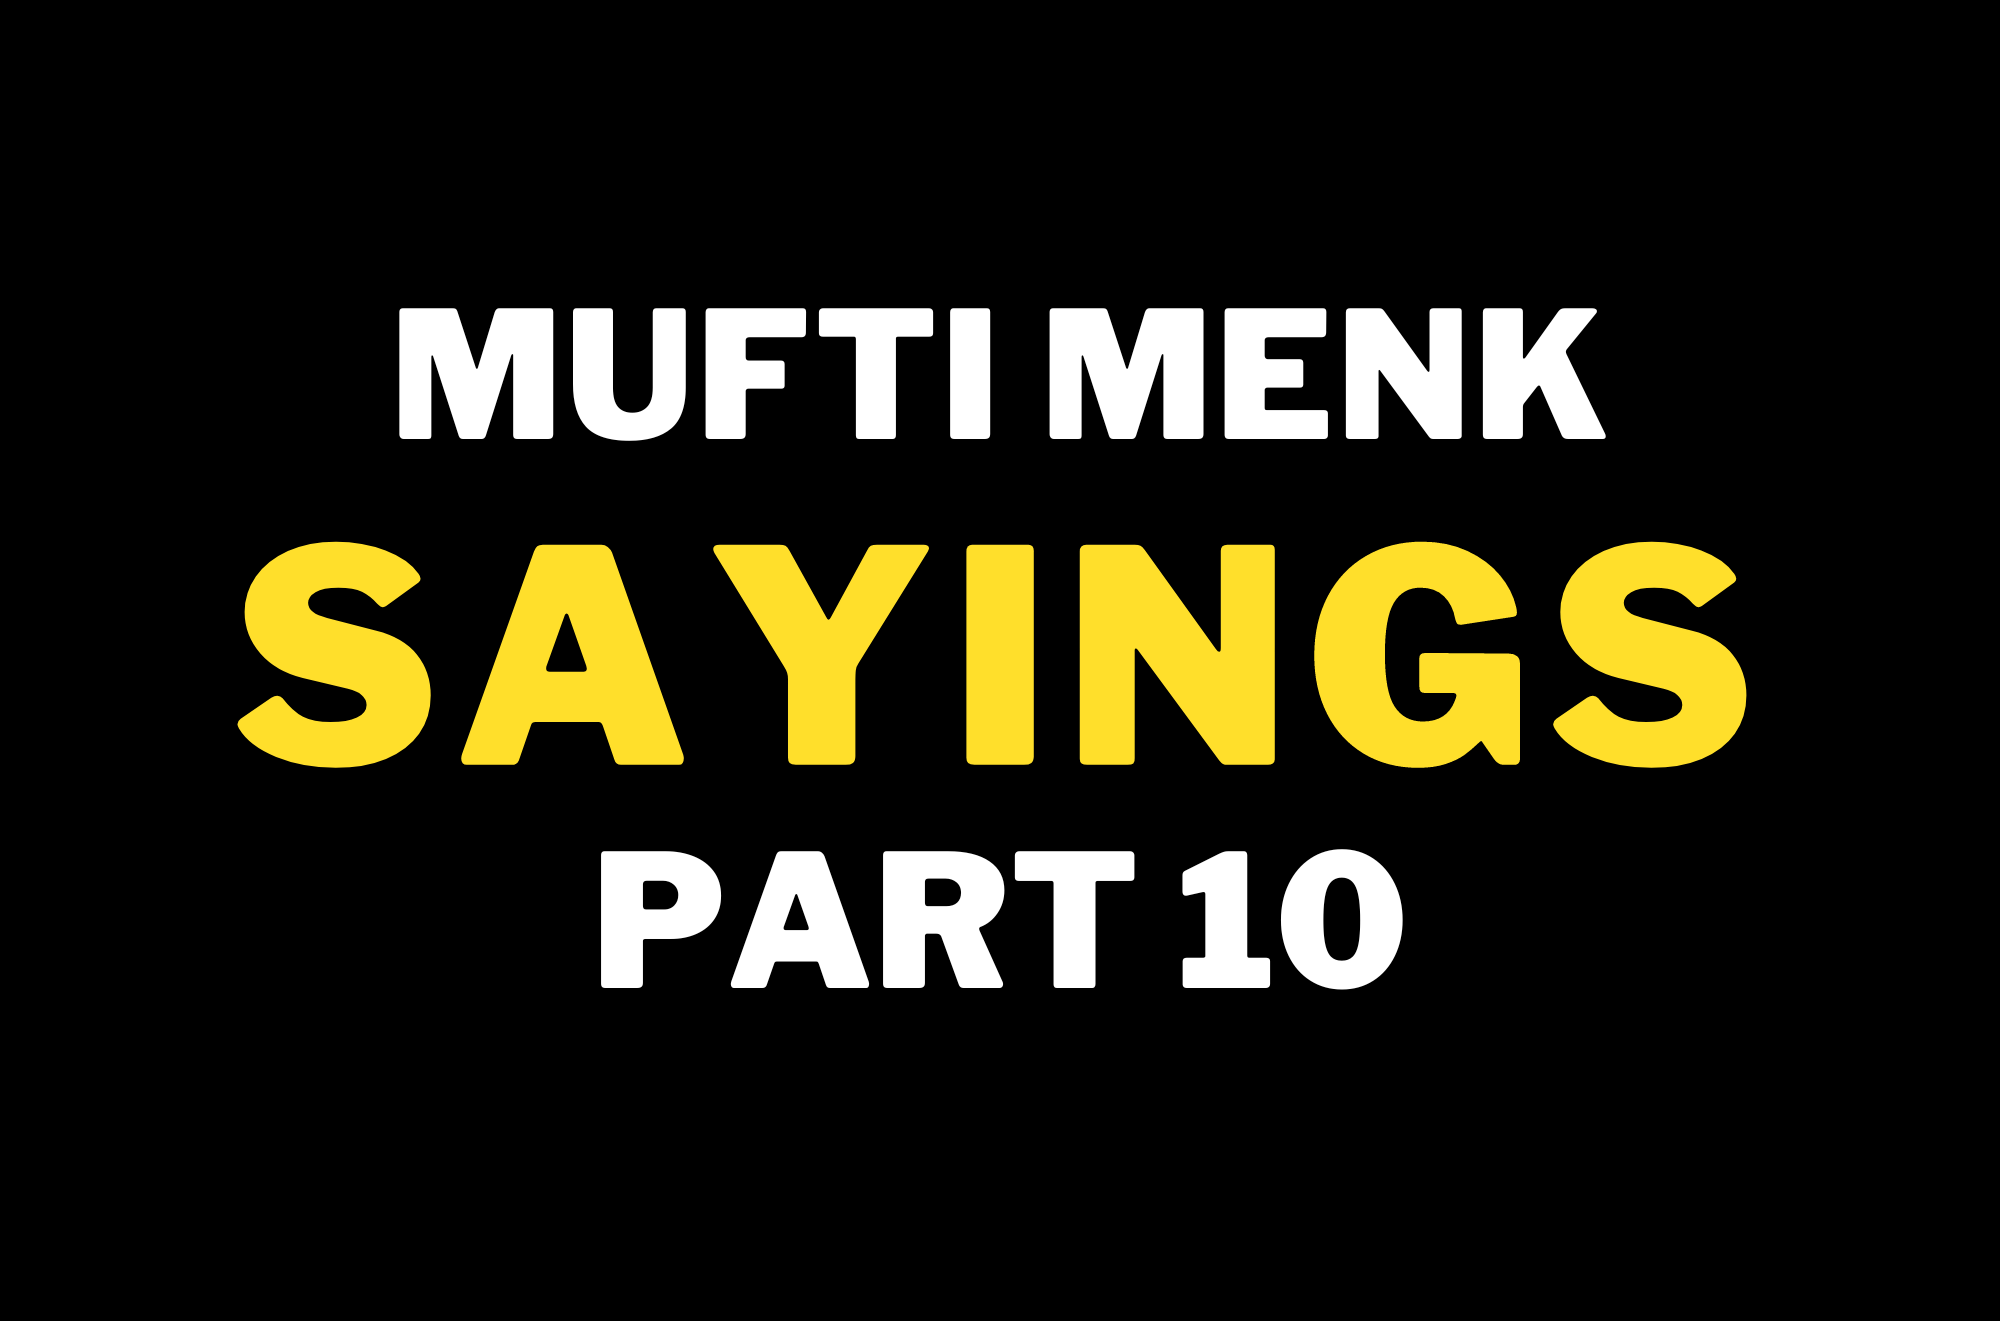 mufti menk sayings,Prioritizing Connection with the Almighty,Avoiding Criticizing Others,Letting Go of Negative Emotions,Seeking Help from the Almighty,Forgiveness and Moving Forward,